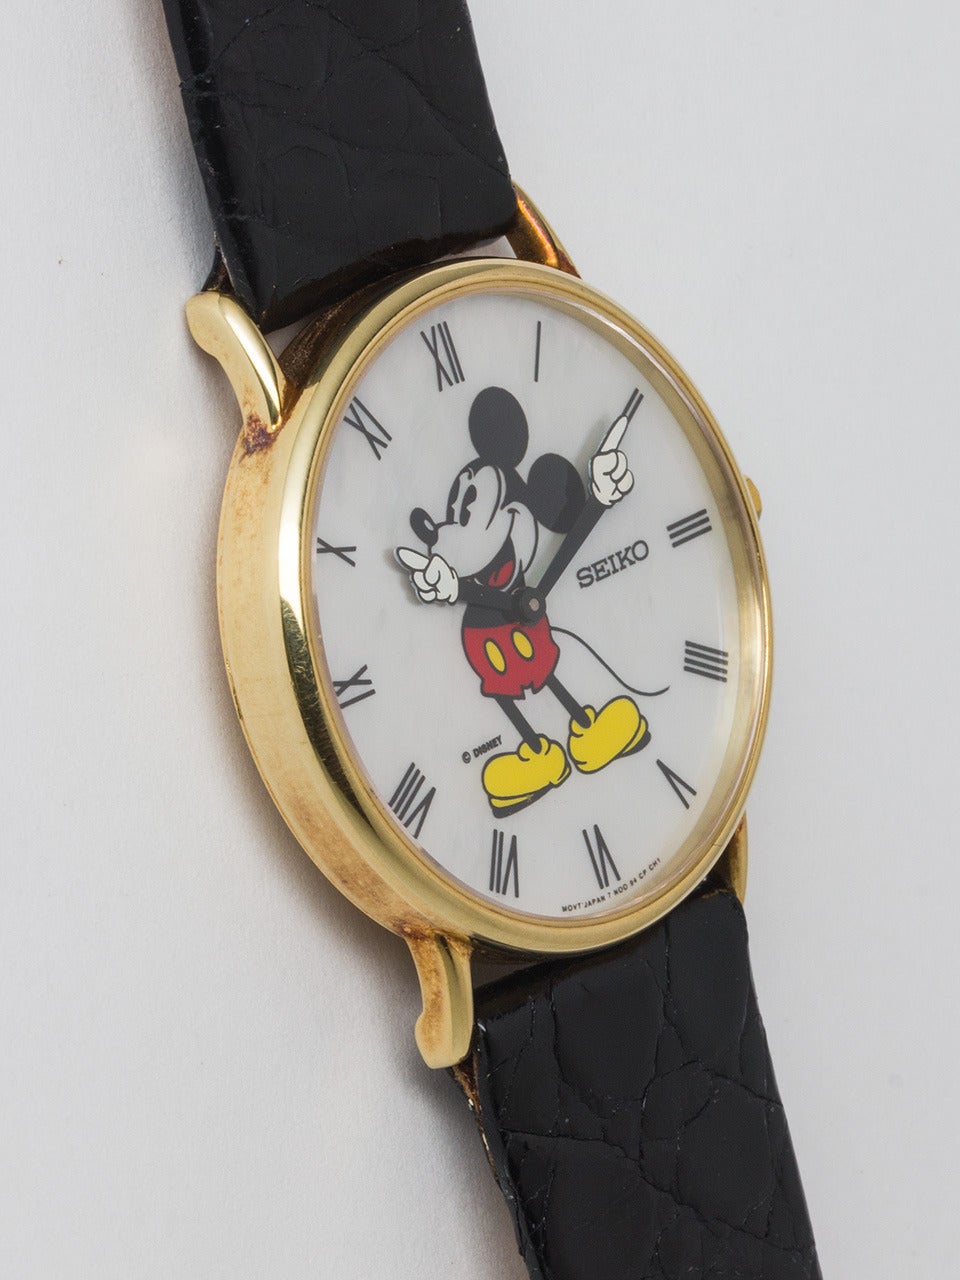 Seiko 14K Yellow Gold Mickey Mouse Limited Edition Wristwatch circa 1980's. Striking mother of pearl dial with polychrome image of Mickey and animated gloved hands. Battery powered quartz movement. Case measuring 35mm diameter. With original black